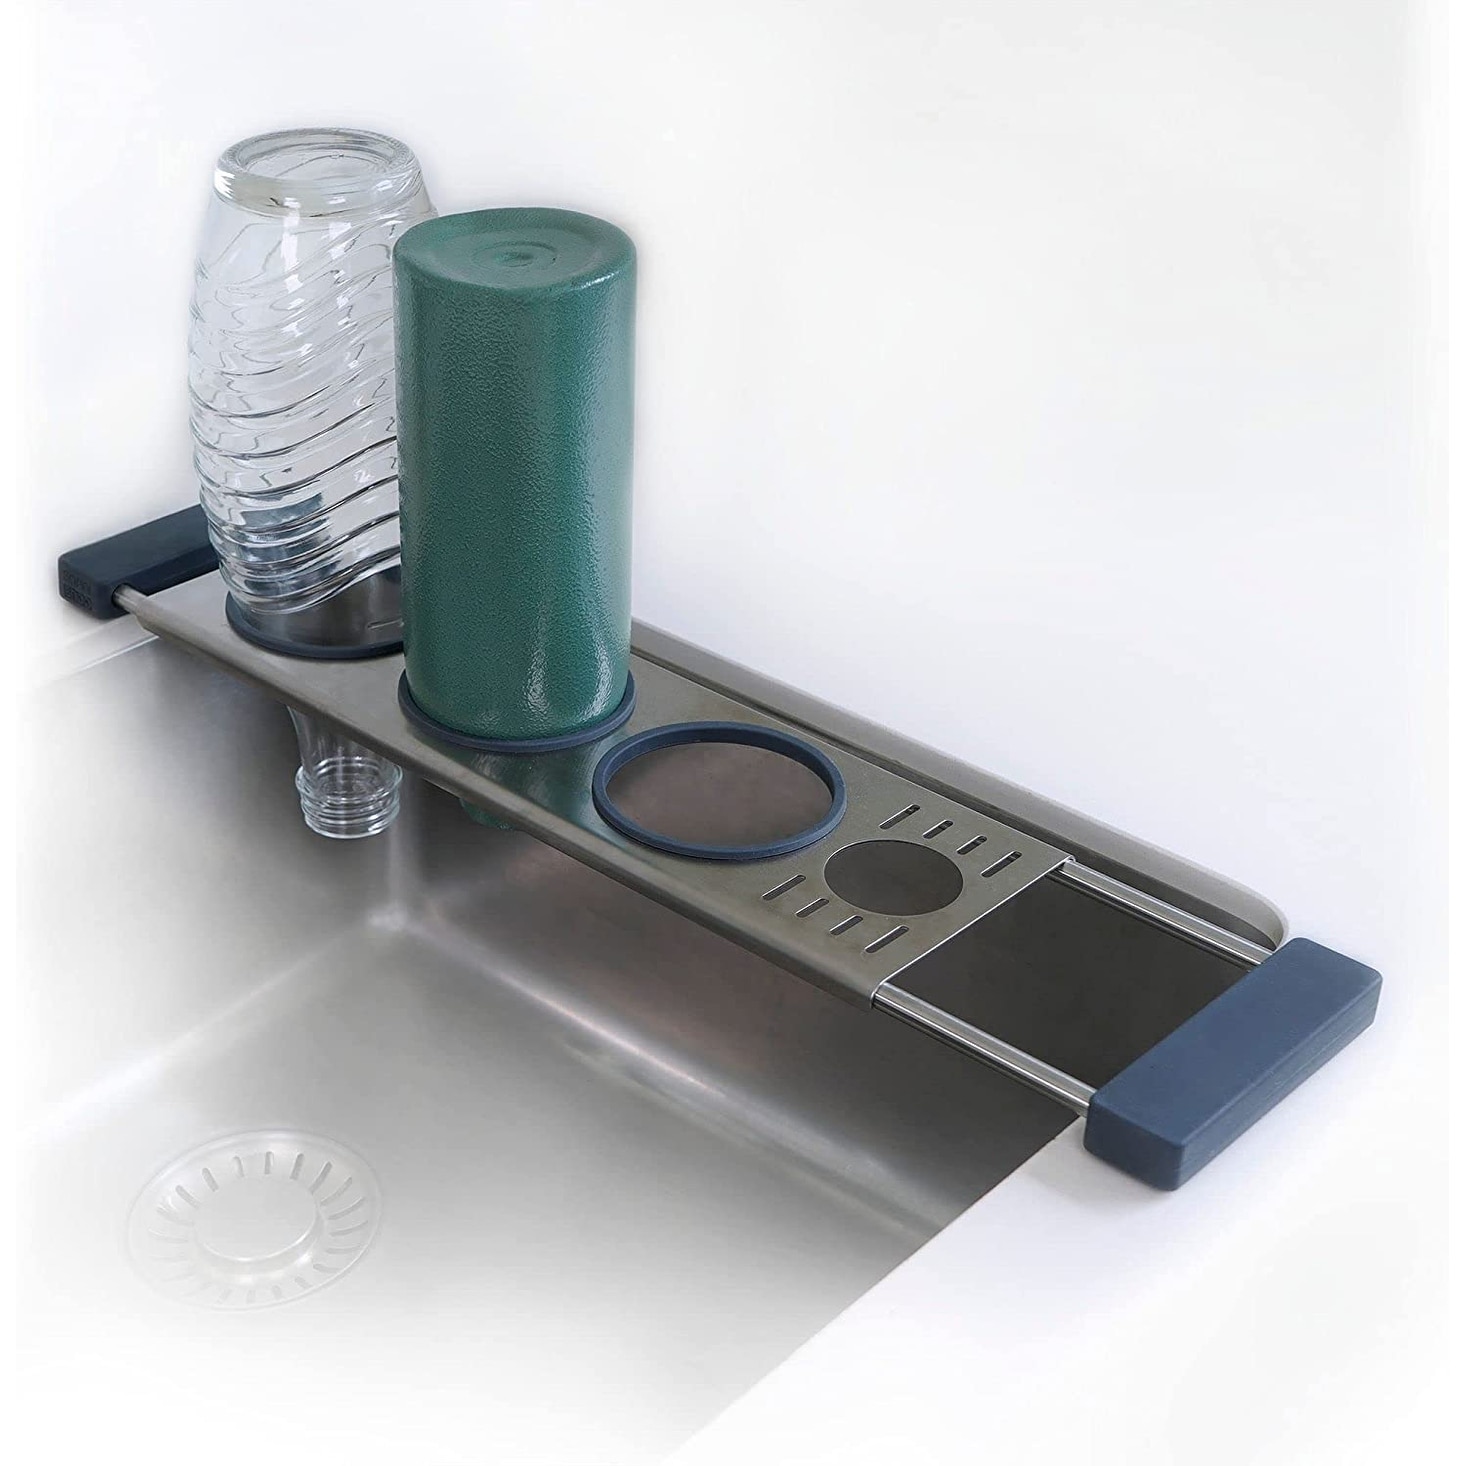 OXO Stainless Steel Sink Caddy